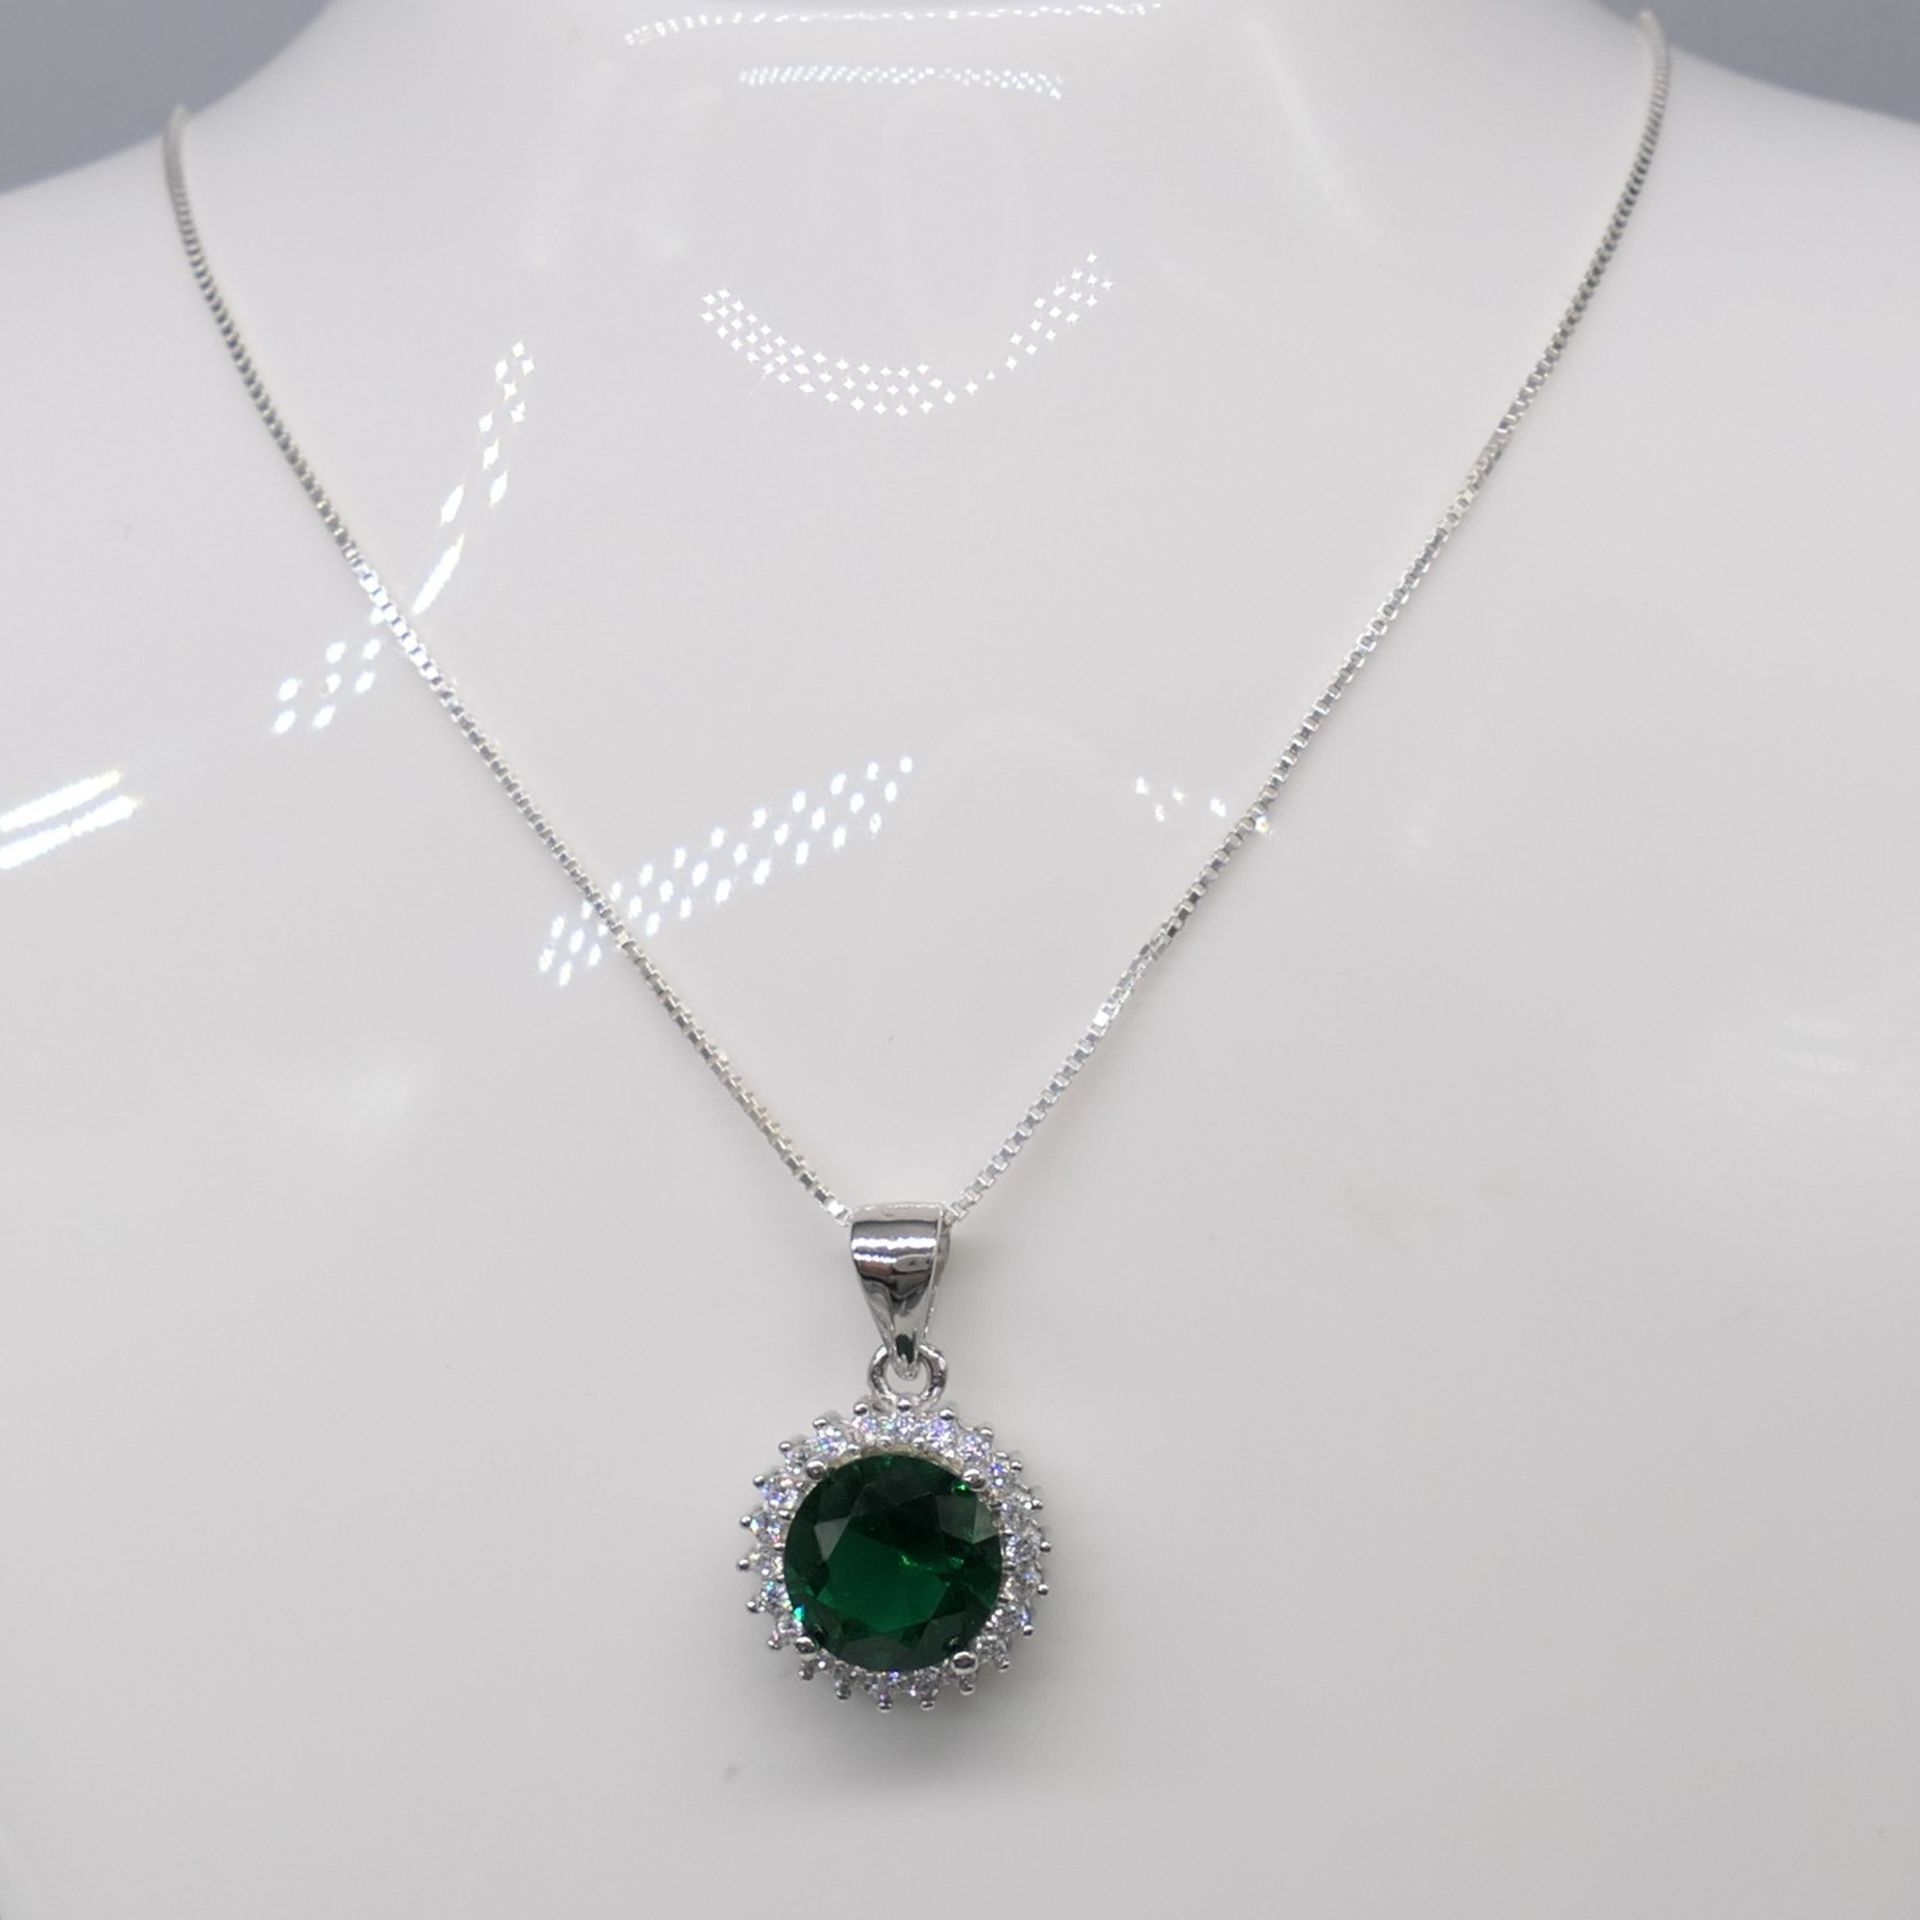 Green gem pendant and chain in sterling silver - Image 5 of 6